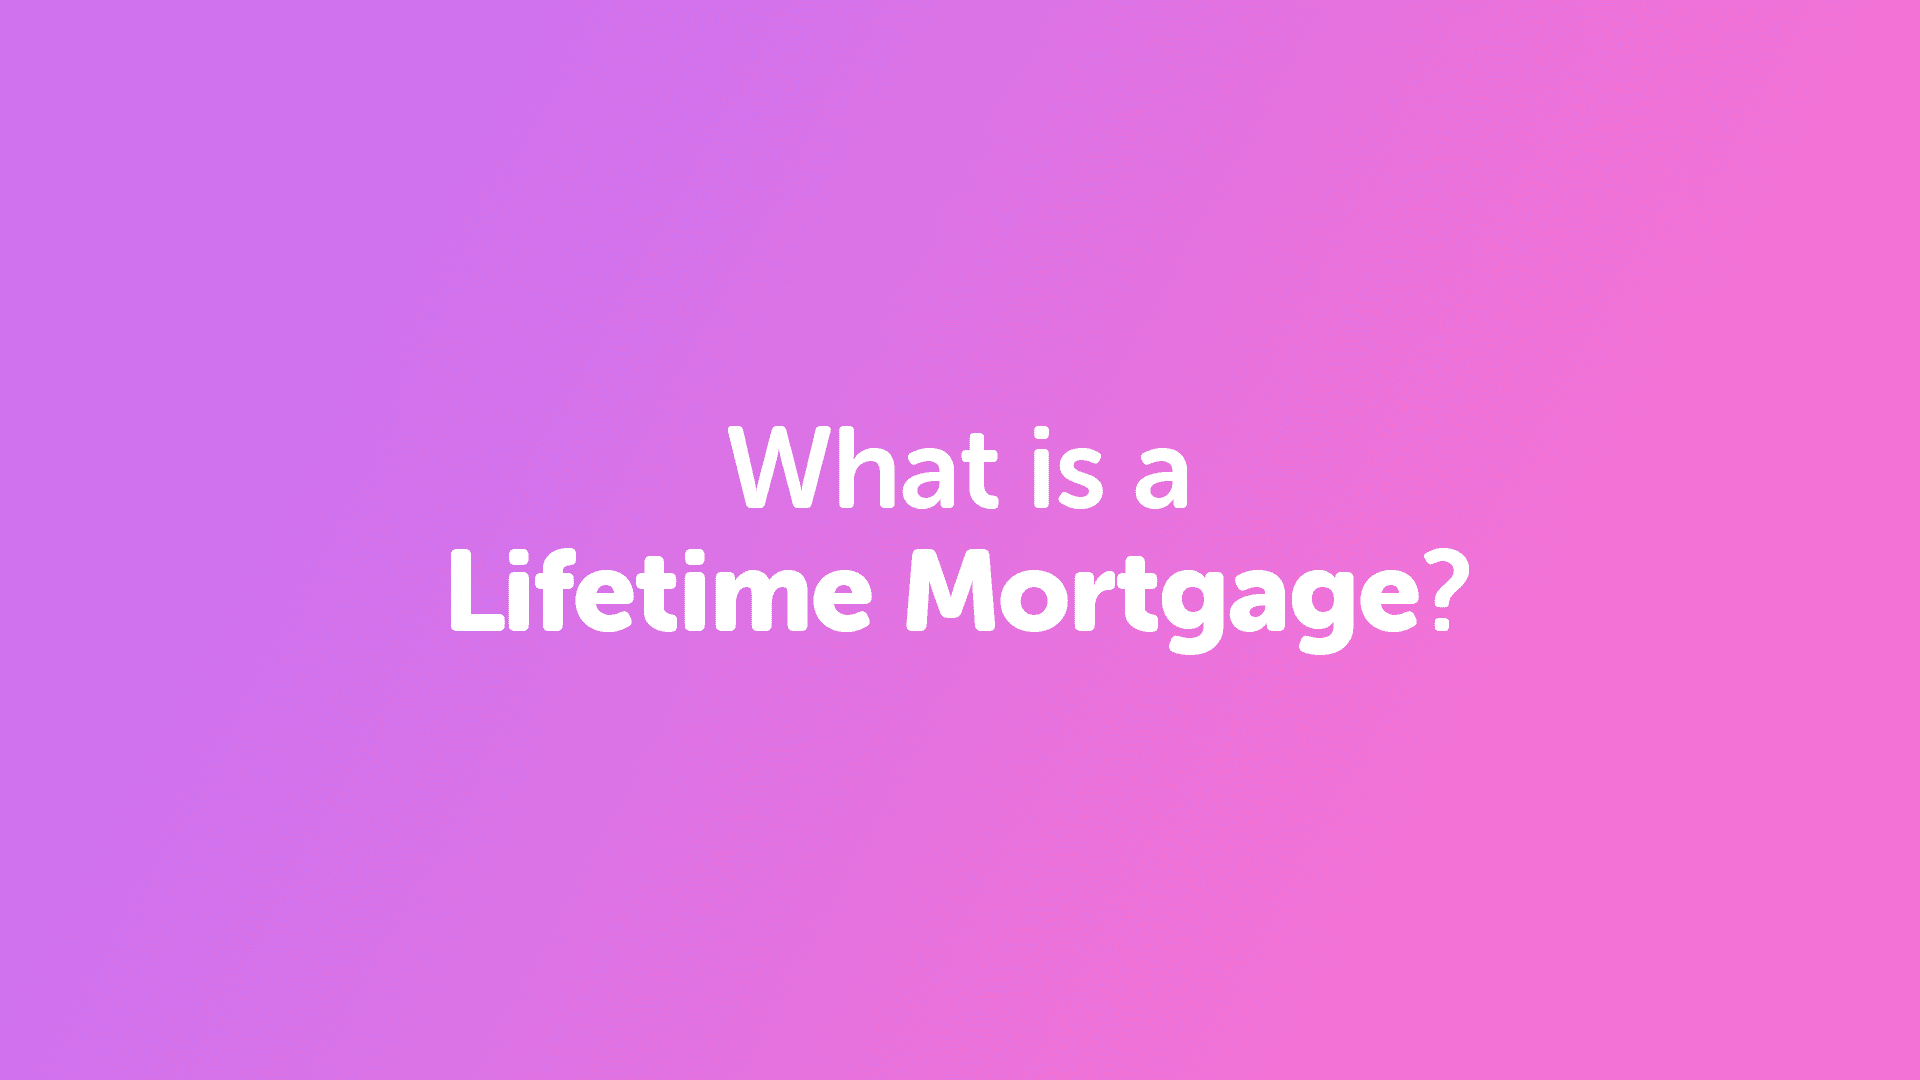 What is a Lifetime Mortgage in Leeds?